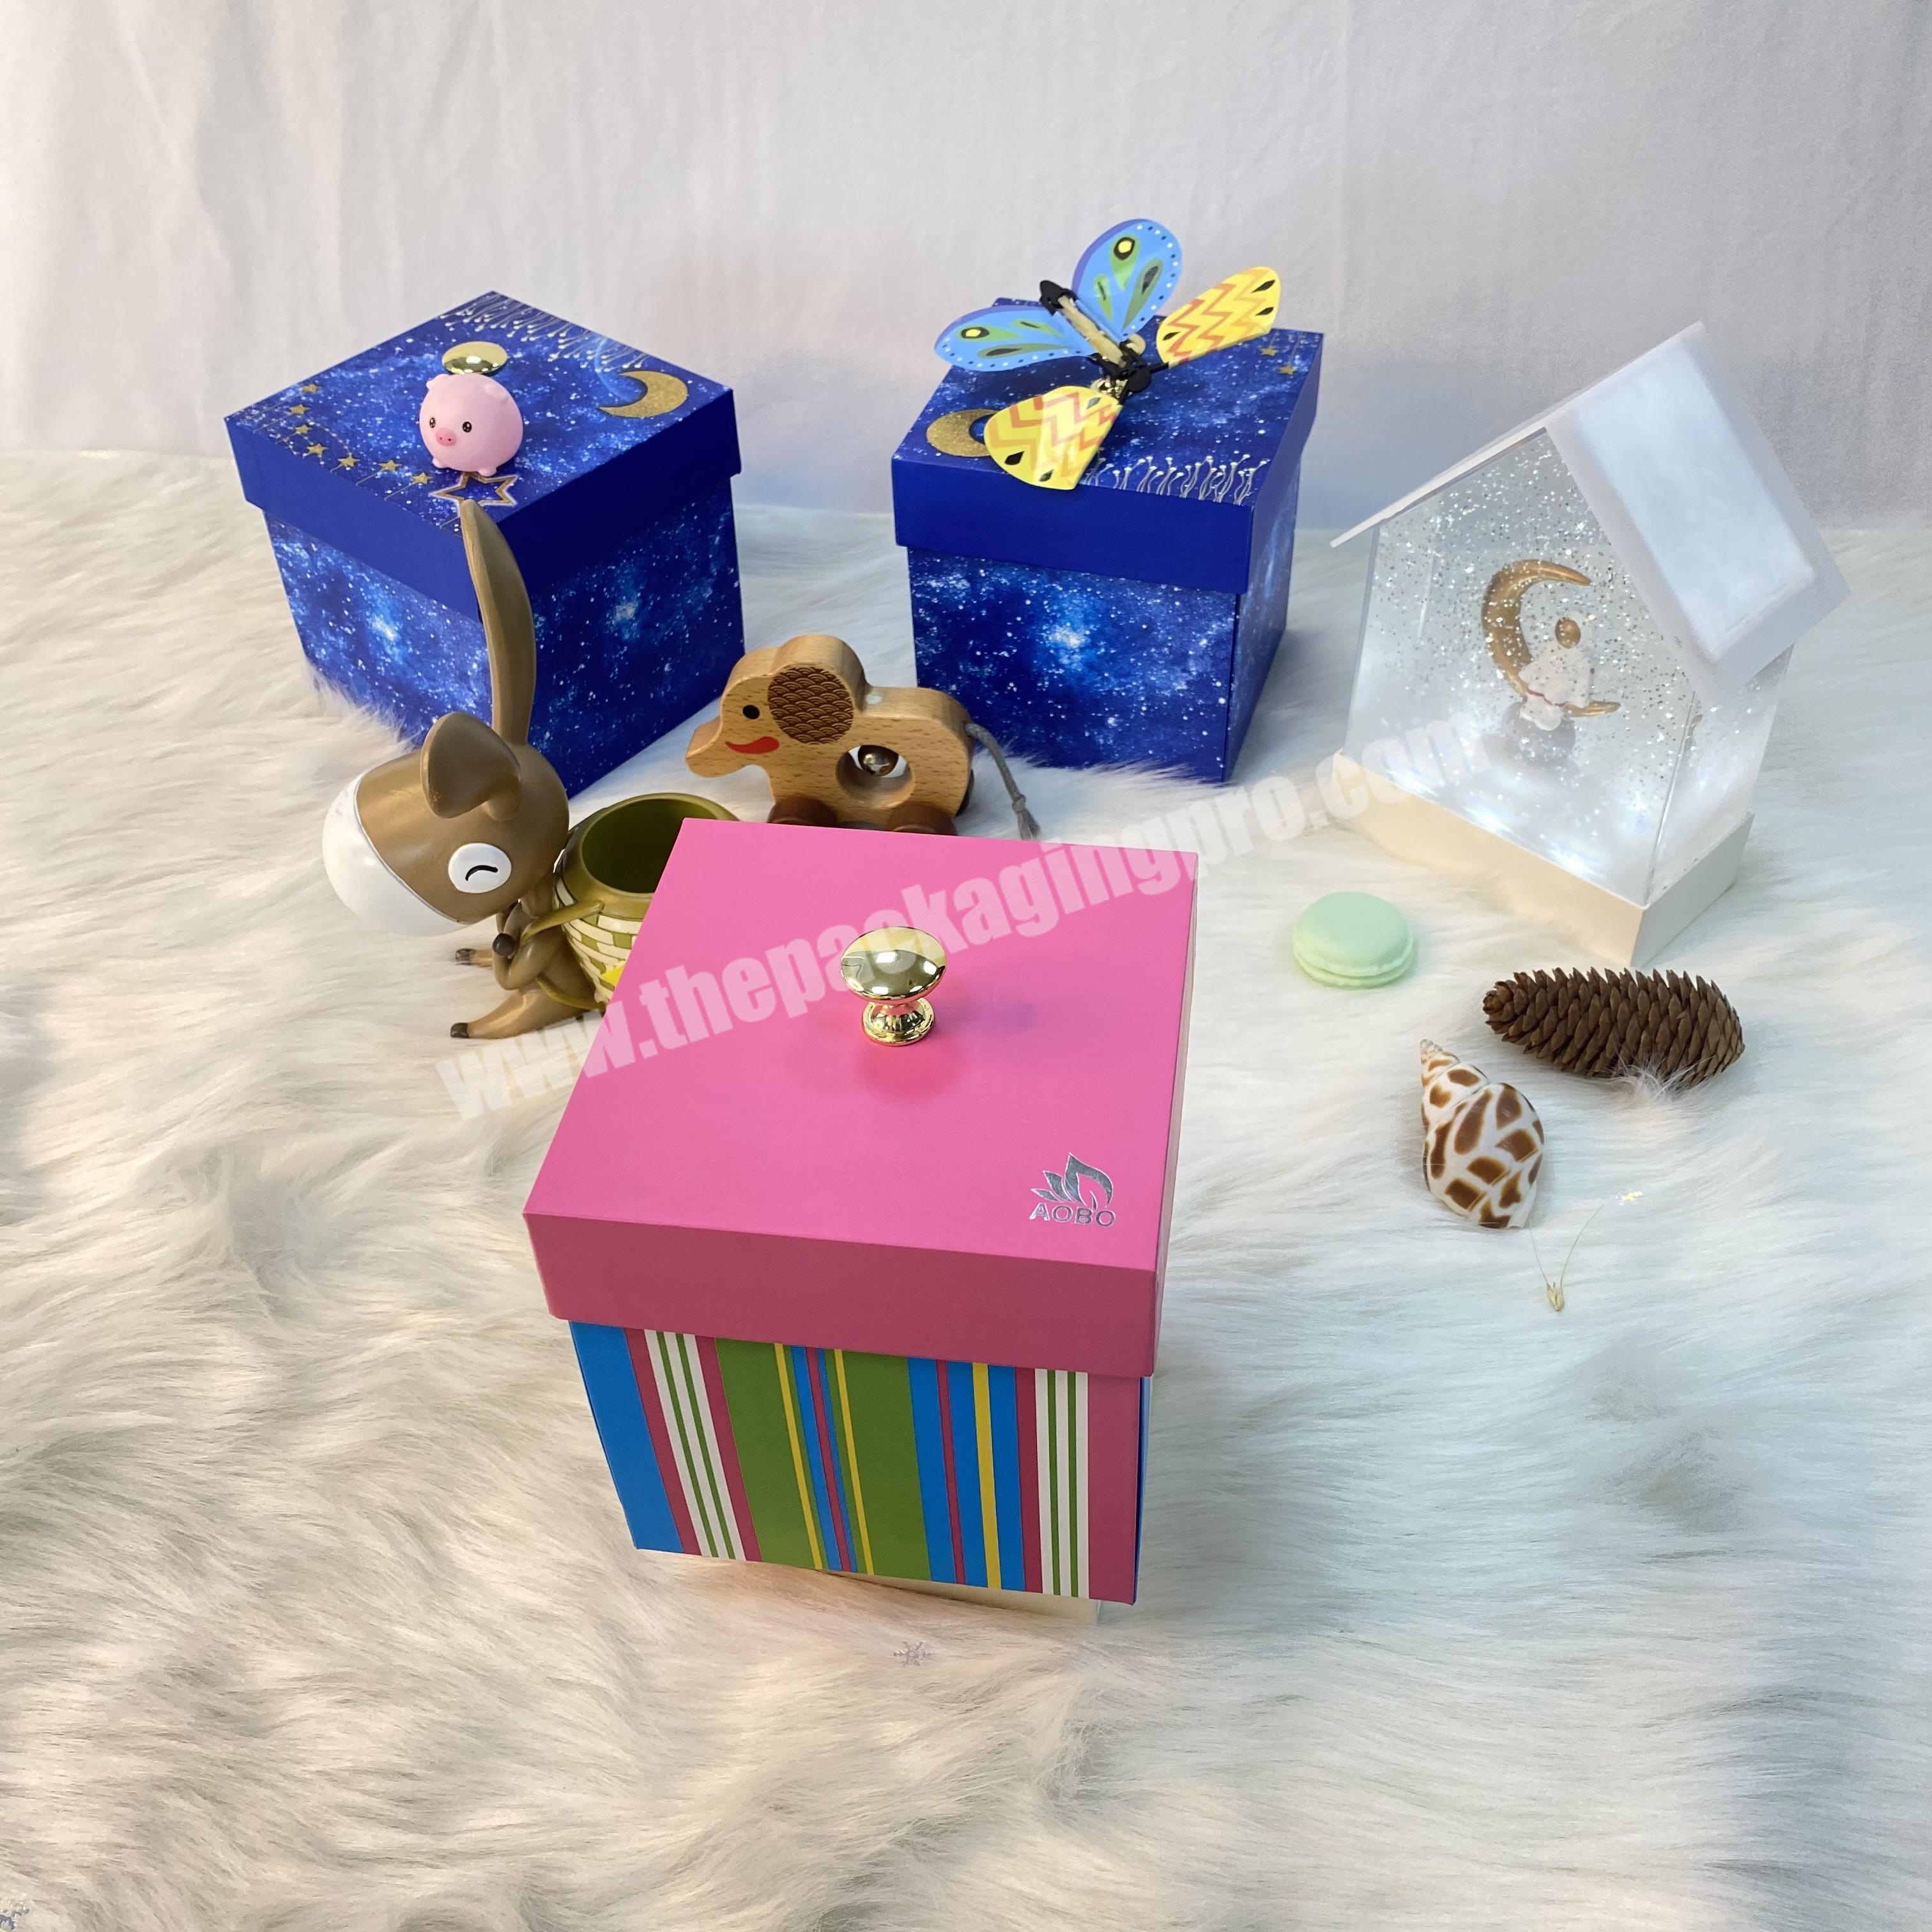 15 Years Factory Free Sample DIY Present Birthday Gift Surprise Explosion Box